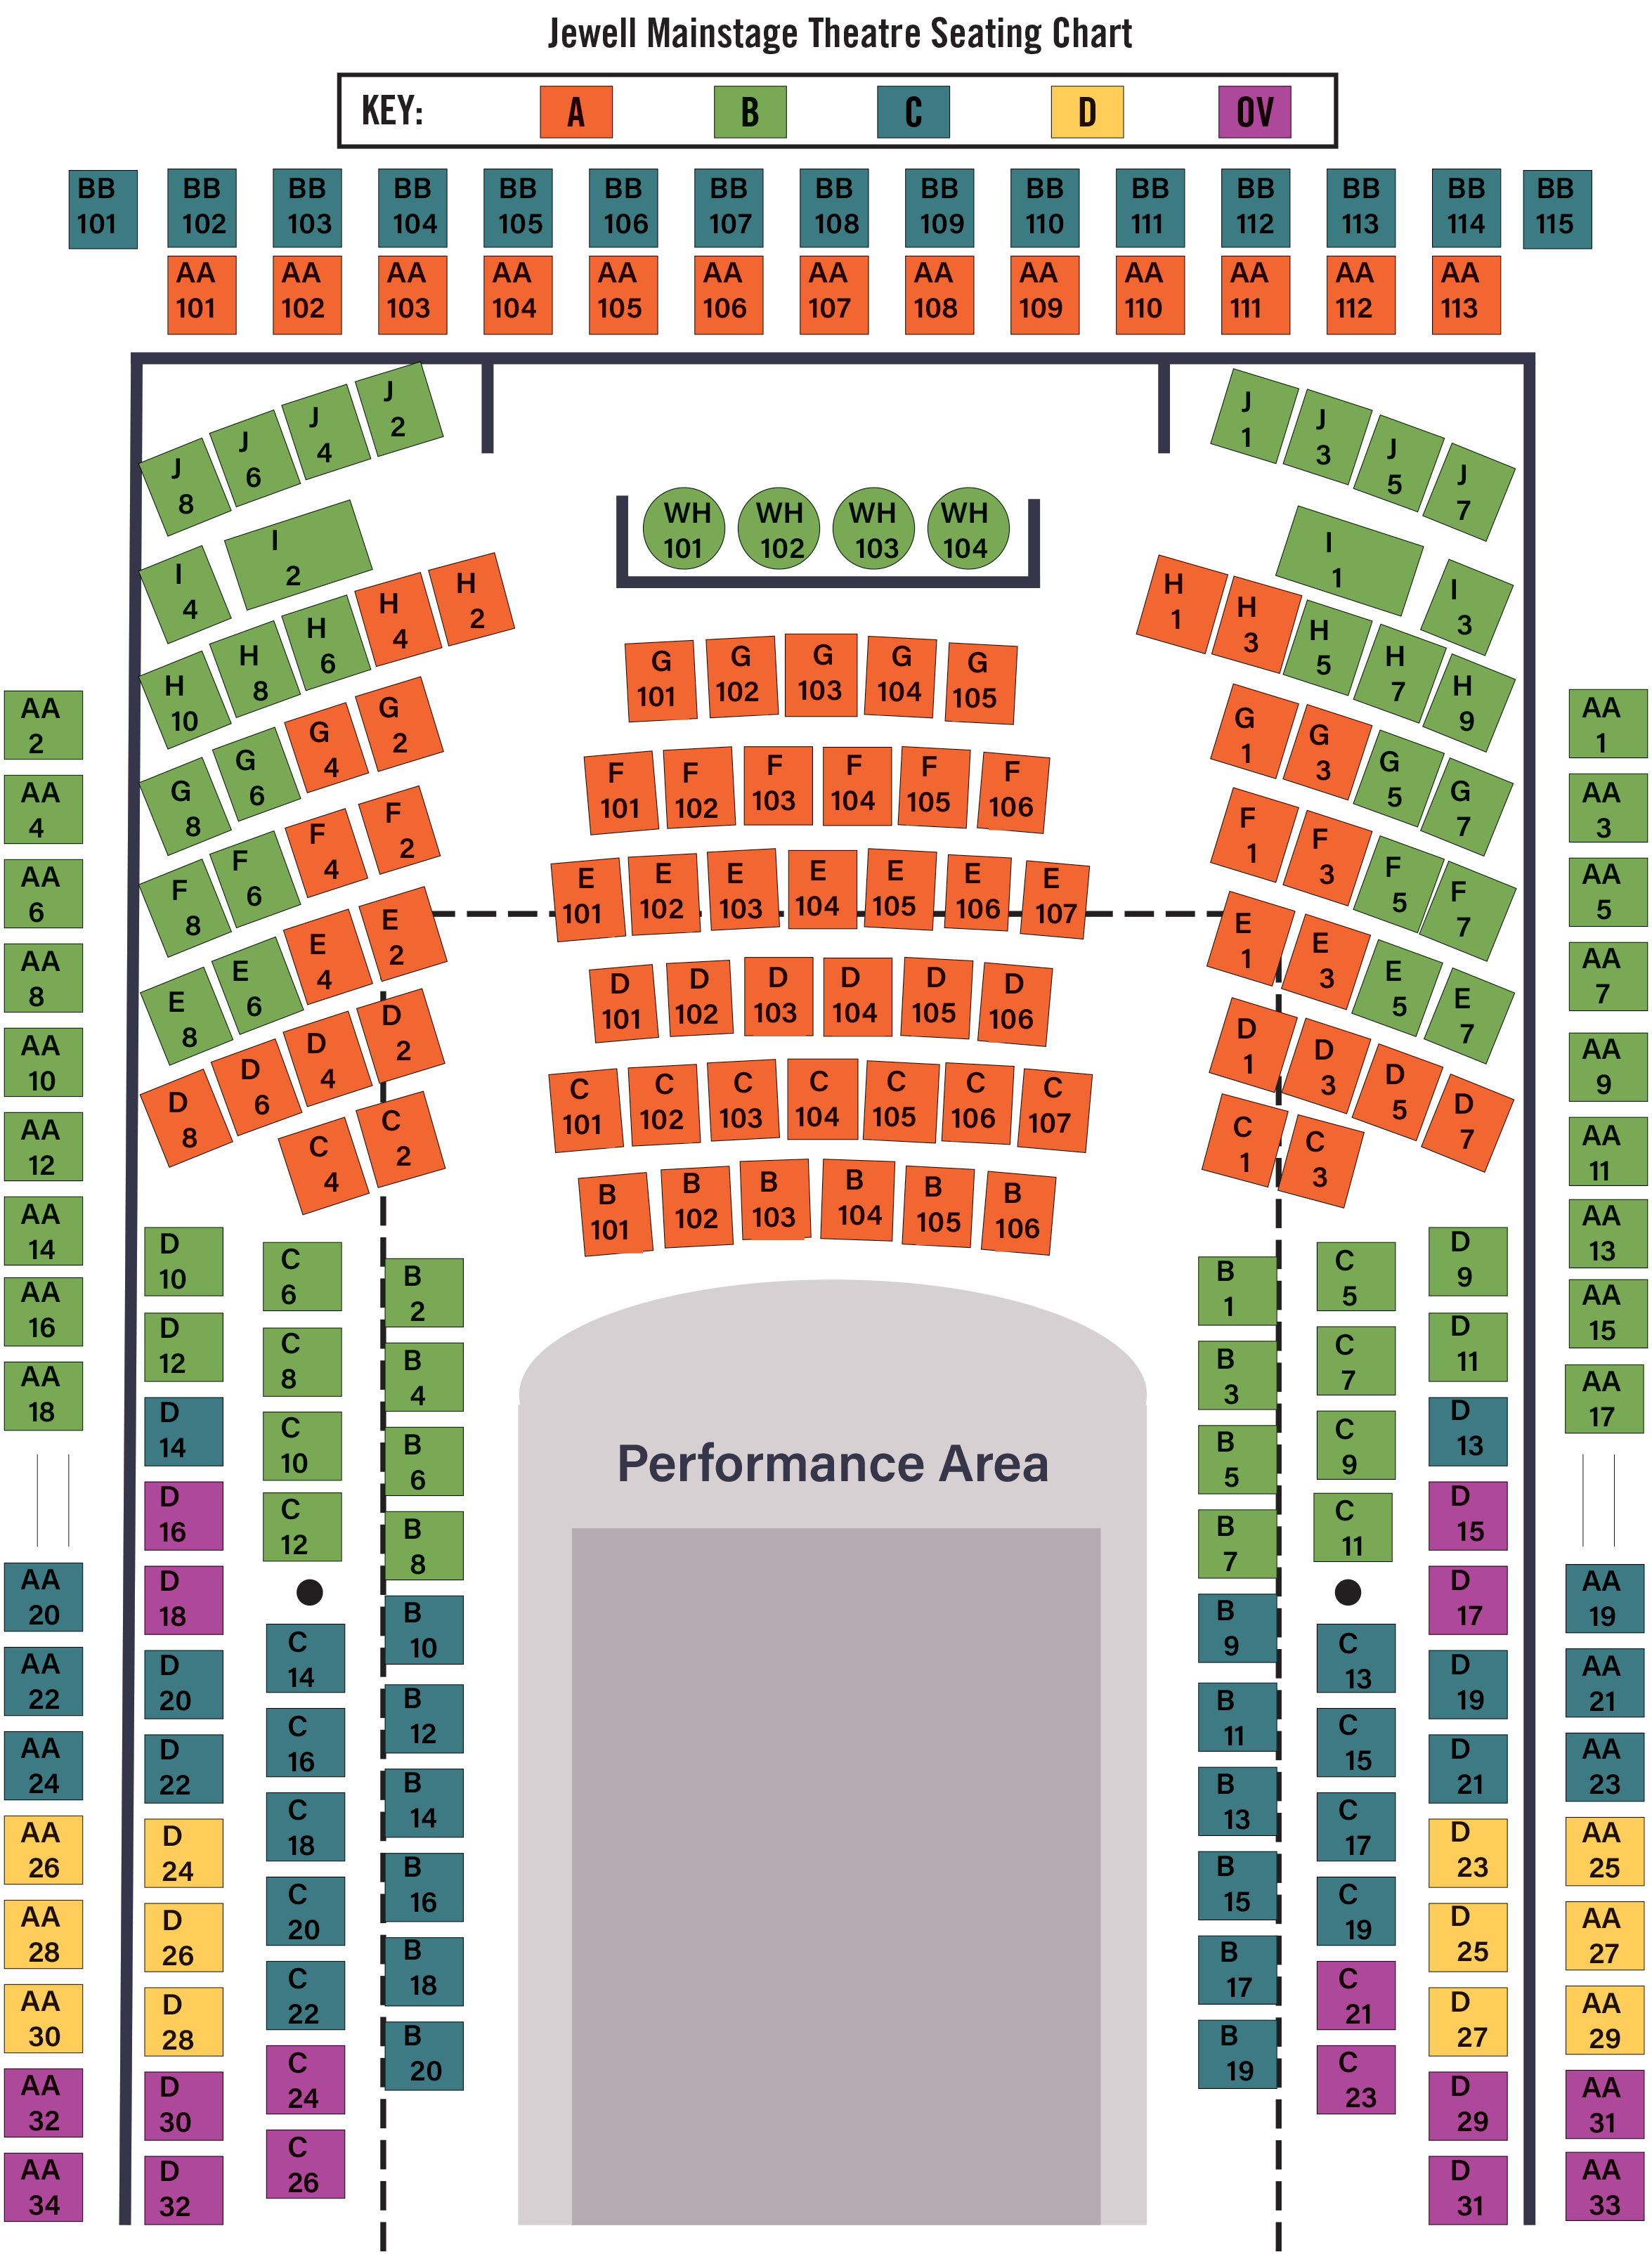 Group Seating & Pricing